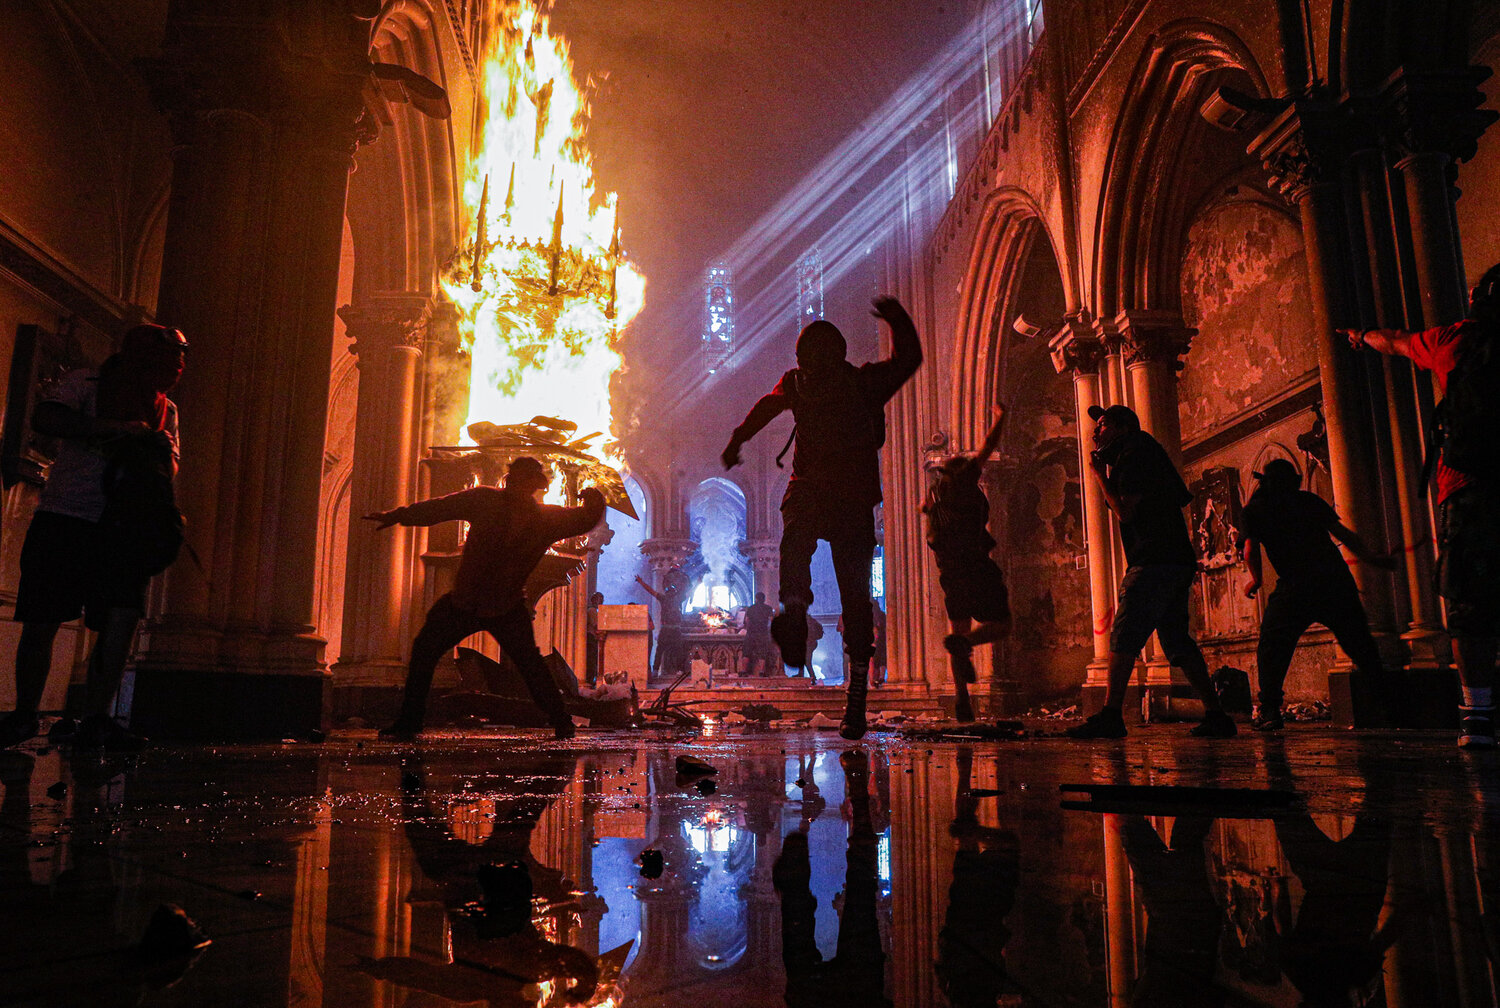  Protesters storm the San Francisco de Borja church, which belongs to the Carabineros, Chile's national police force, in Santiago, Chile, on Oct. 18, 2020, the first anniversary of the start of anti-government mass protests over inequality. (AP Photo/Esteban Felix) 